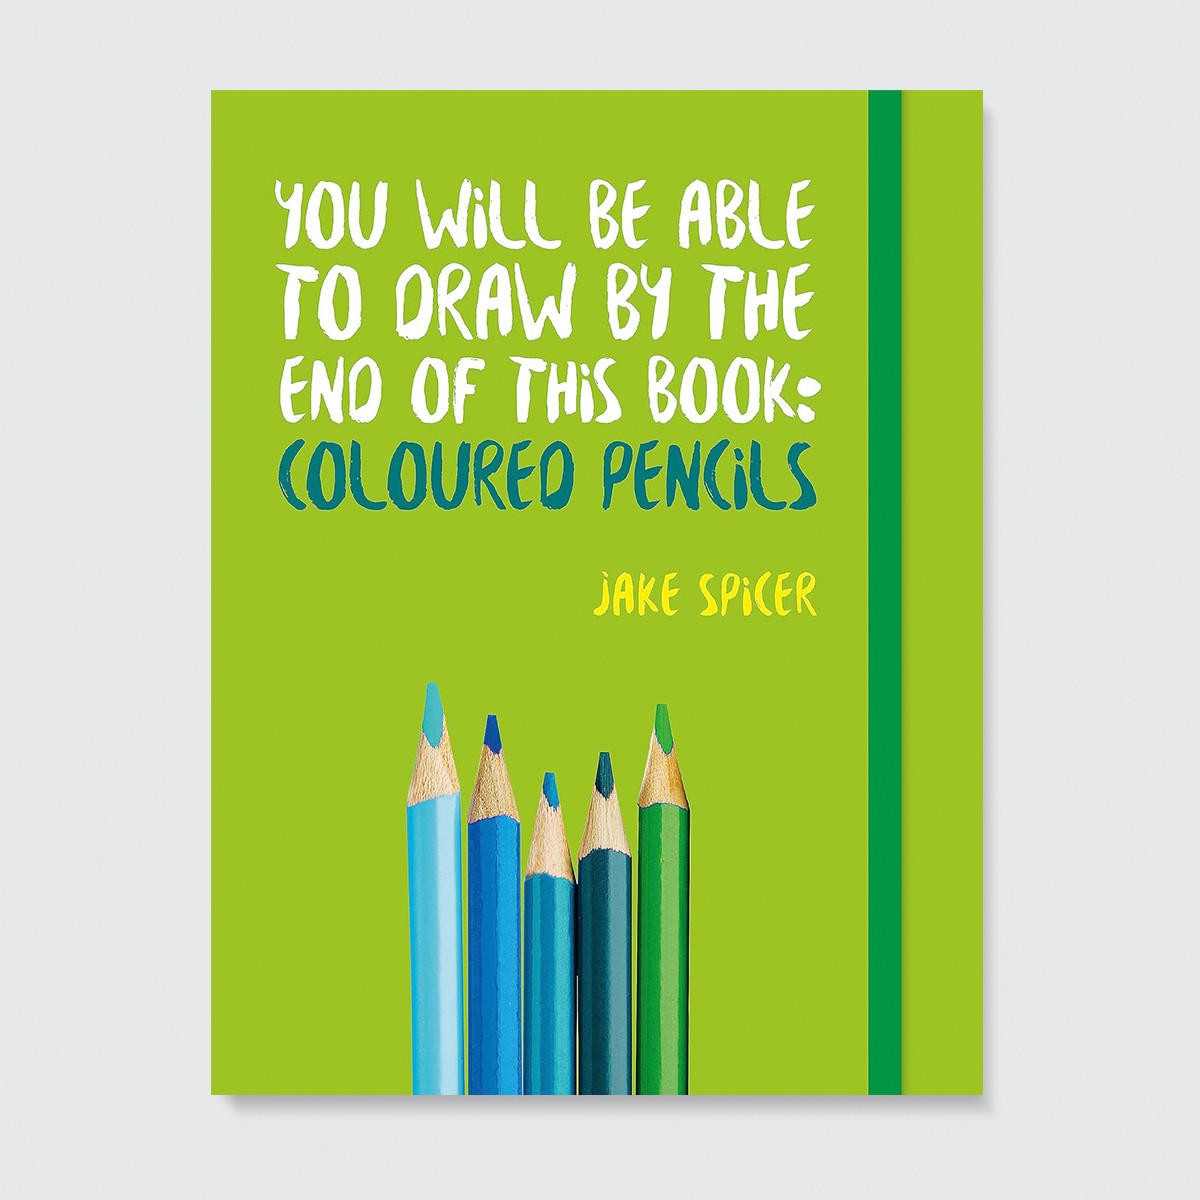 ILEX You Will Be Able to Draw by the End of This Book: Coloured Pencils by Jake Spicer